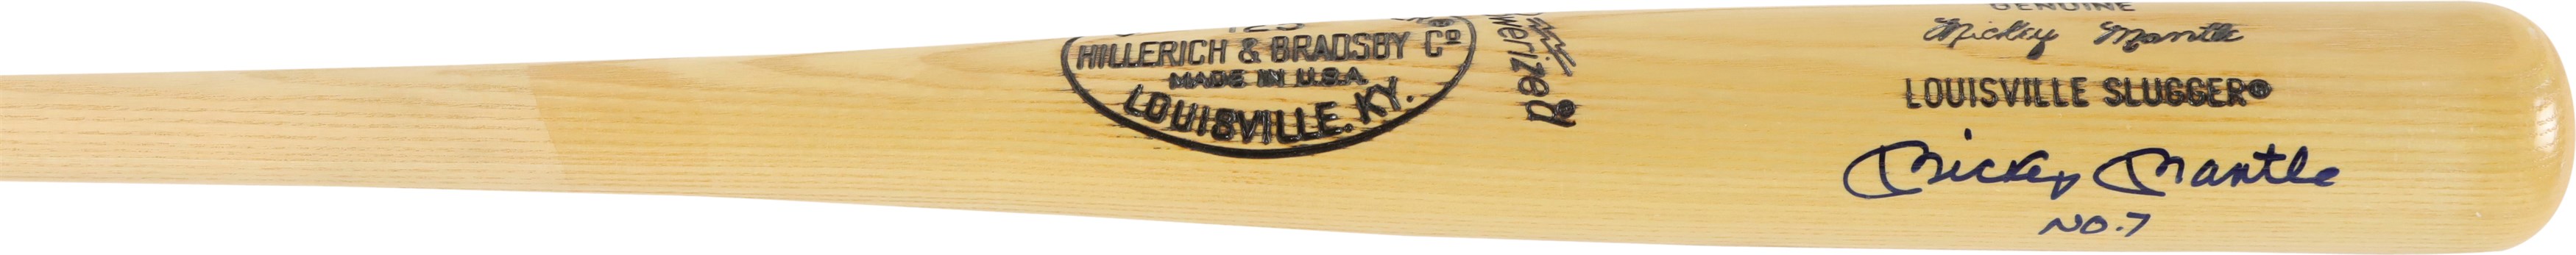 Mantle and Maris - Mickey Mantle "No. 7" Signed Bat (PSA)